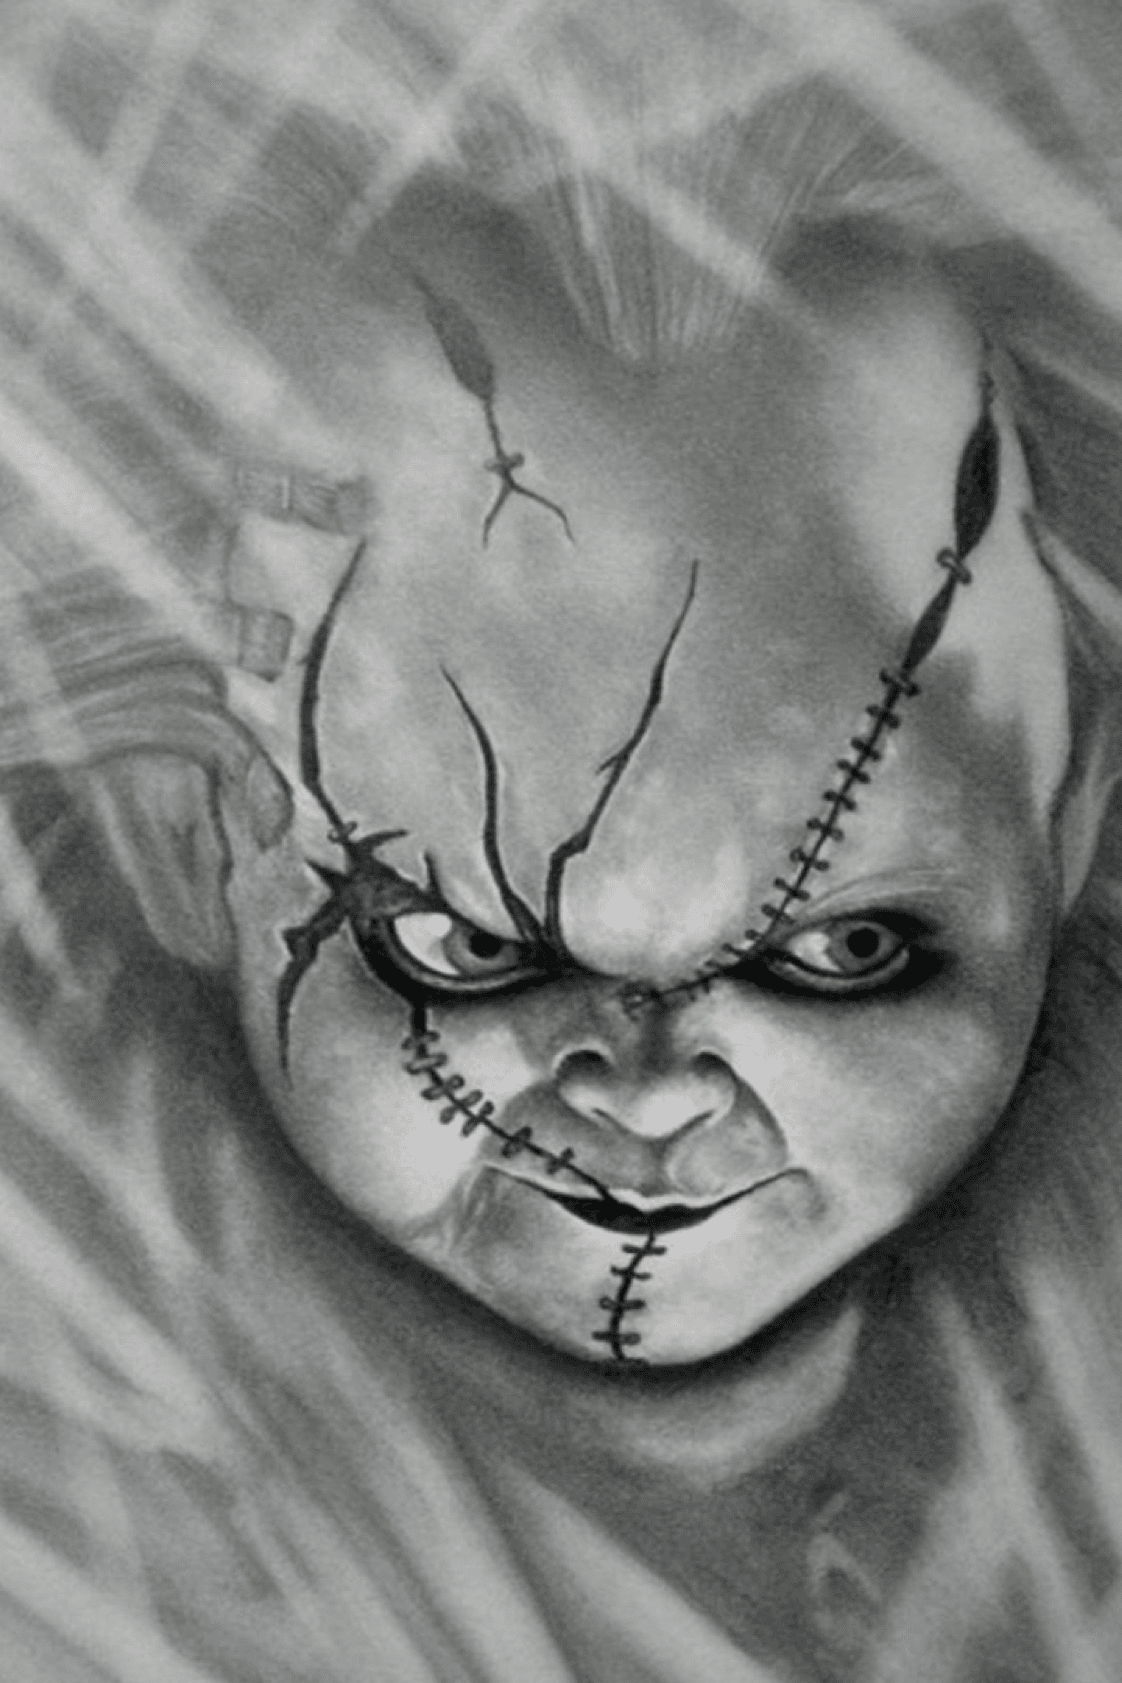 2 Awesome Chucky Tattoo Art Designs Gallery